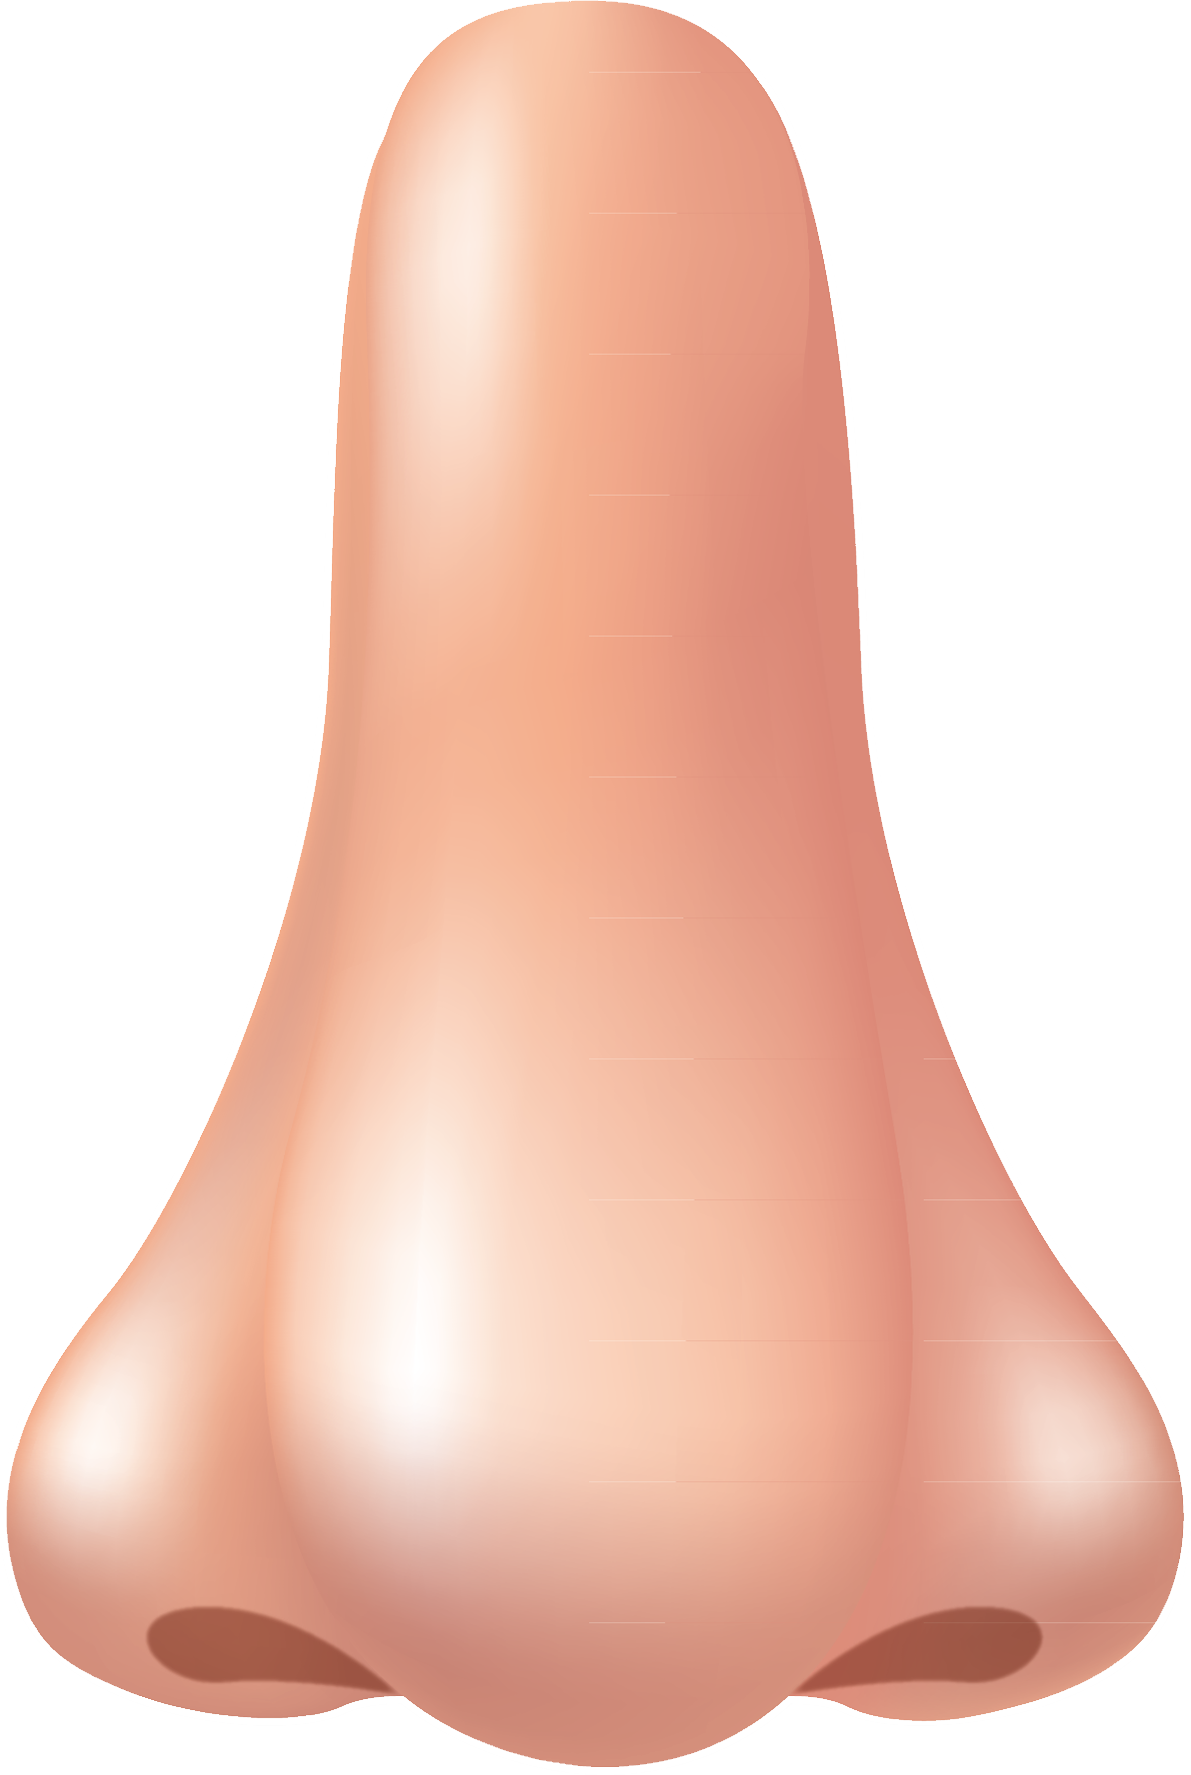 Nose PNG images 